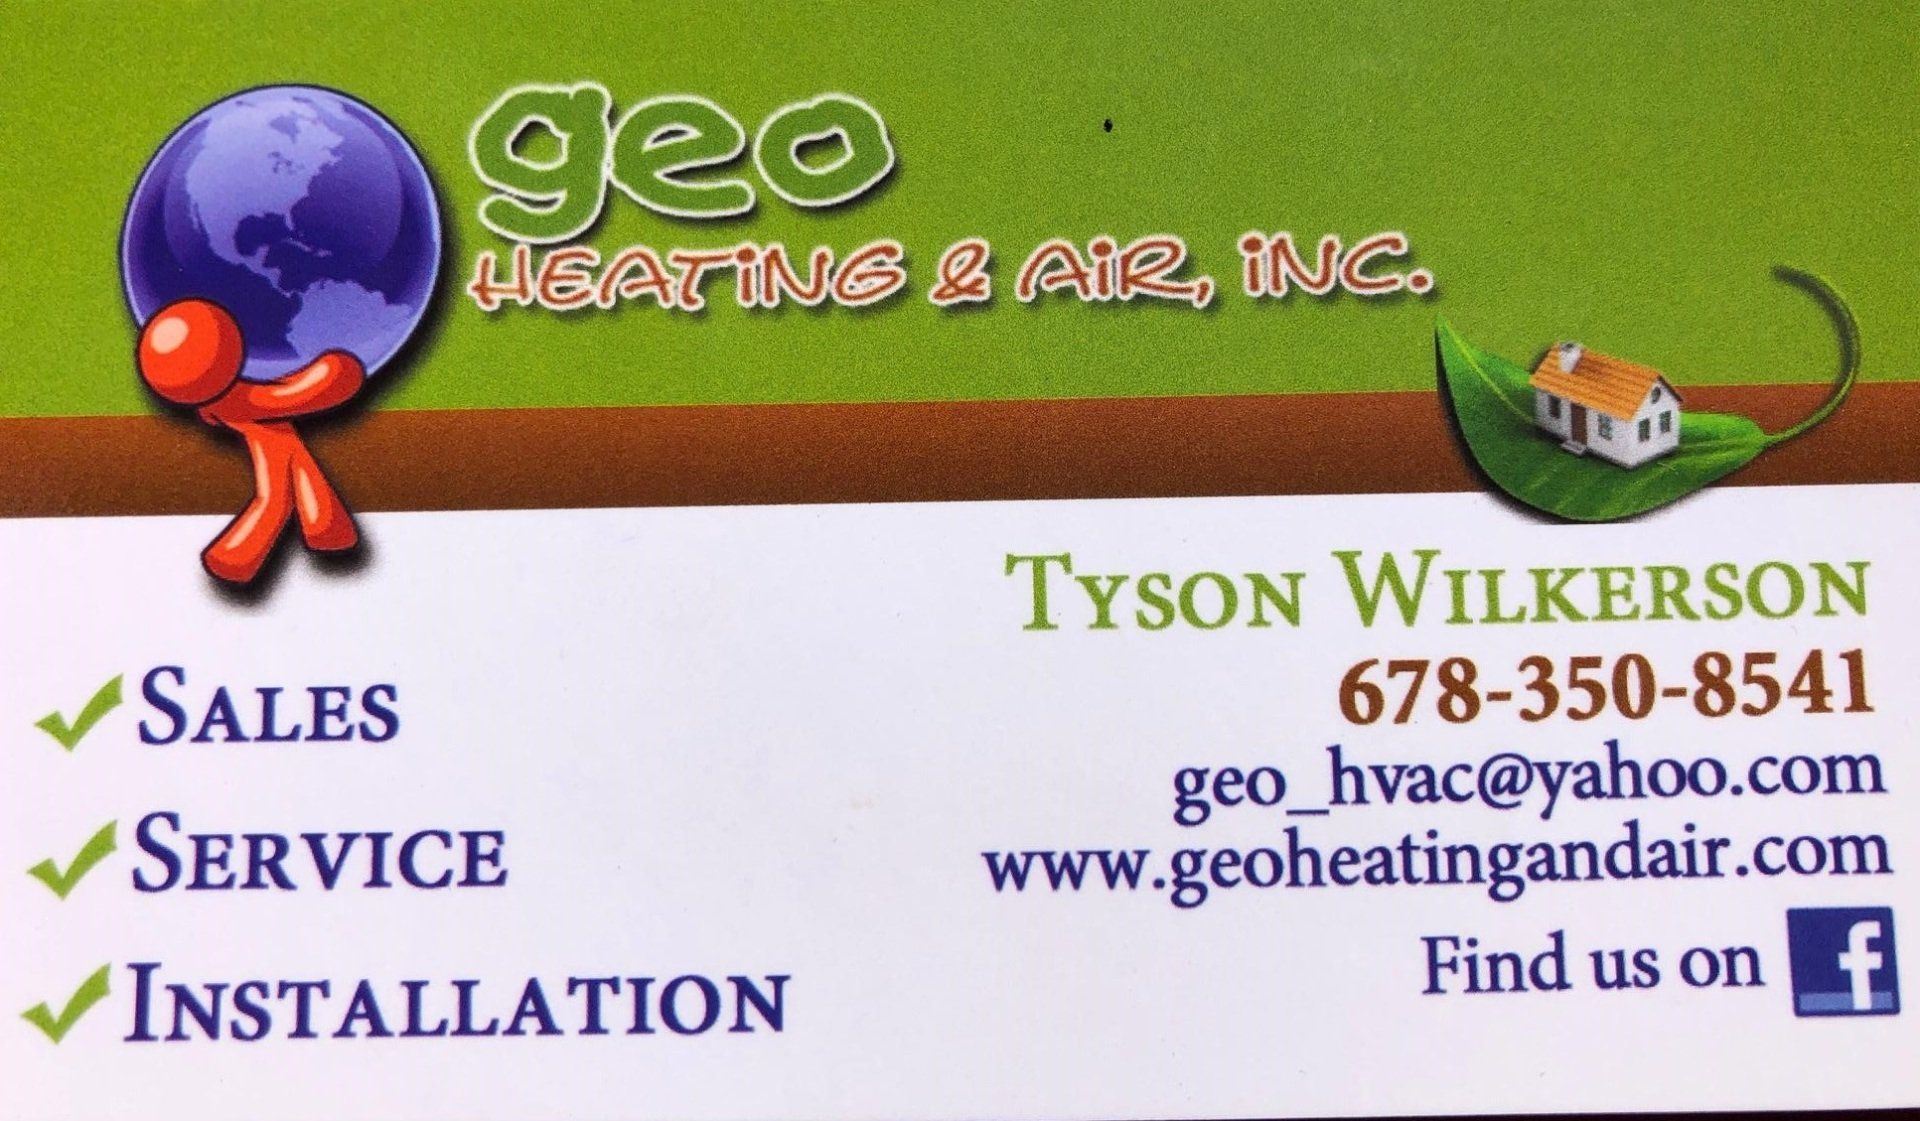 a business card for geo heating and air inc.